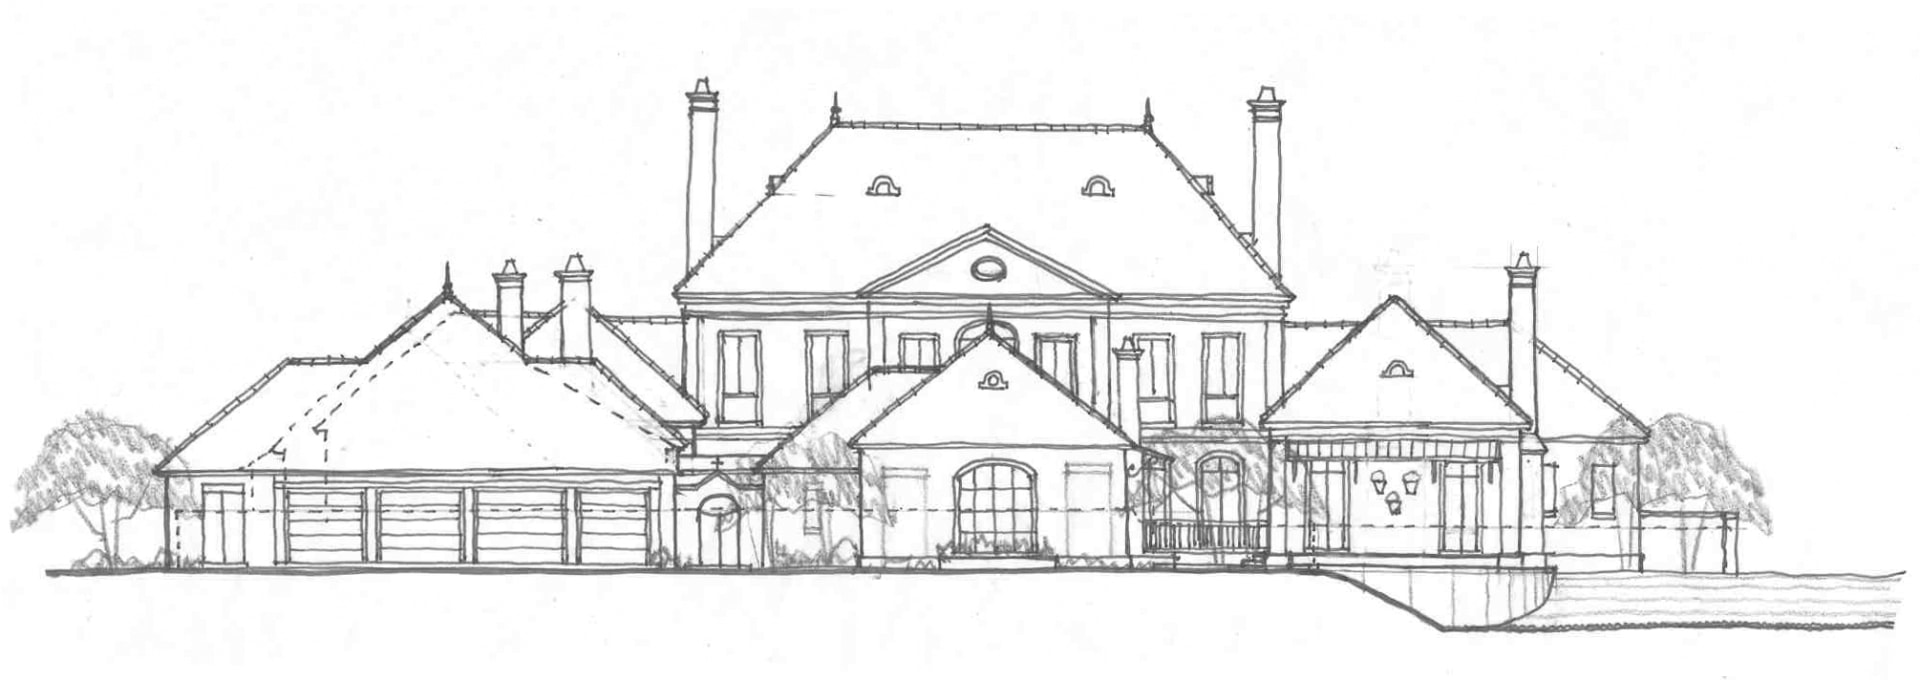 Rendering of house built in the French Renaissance architectural style. Designed by Cockfield Jackson Architects.